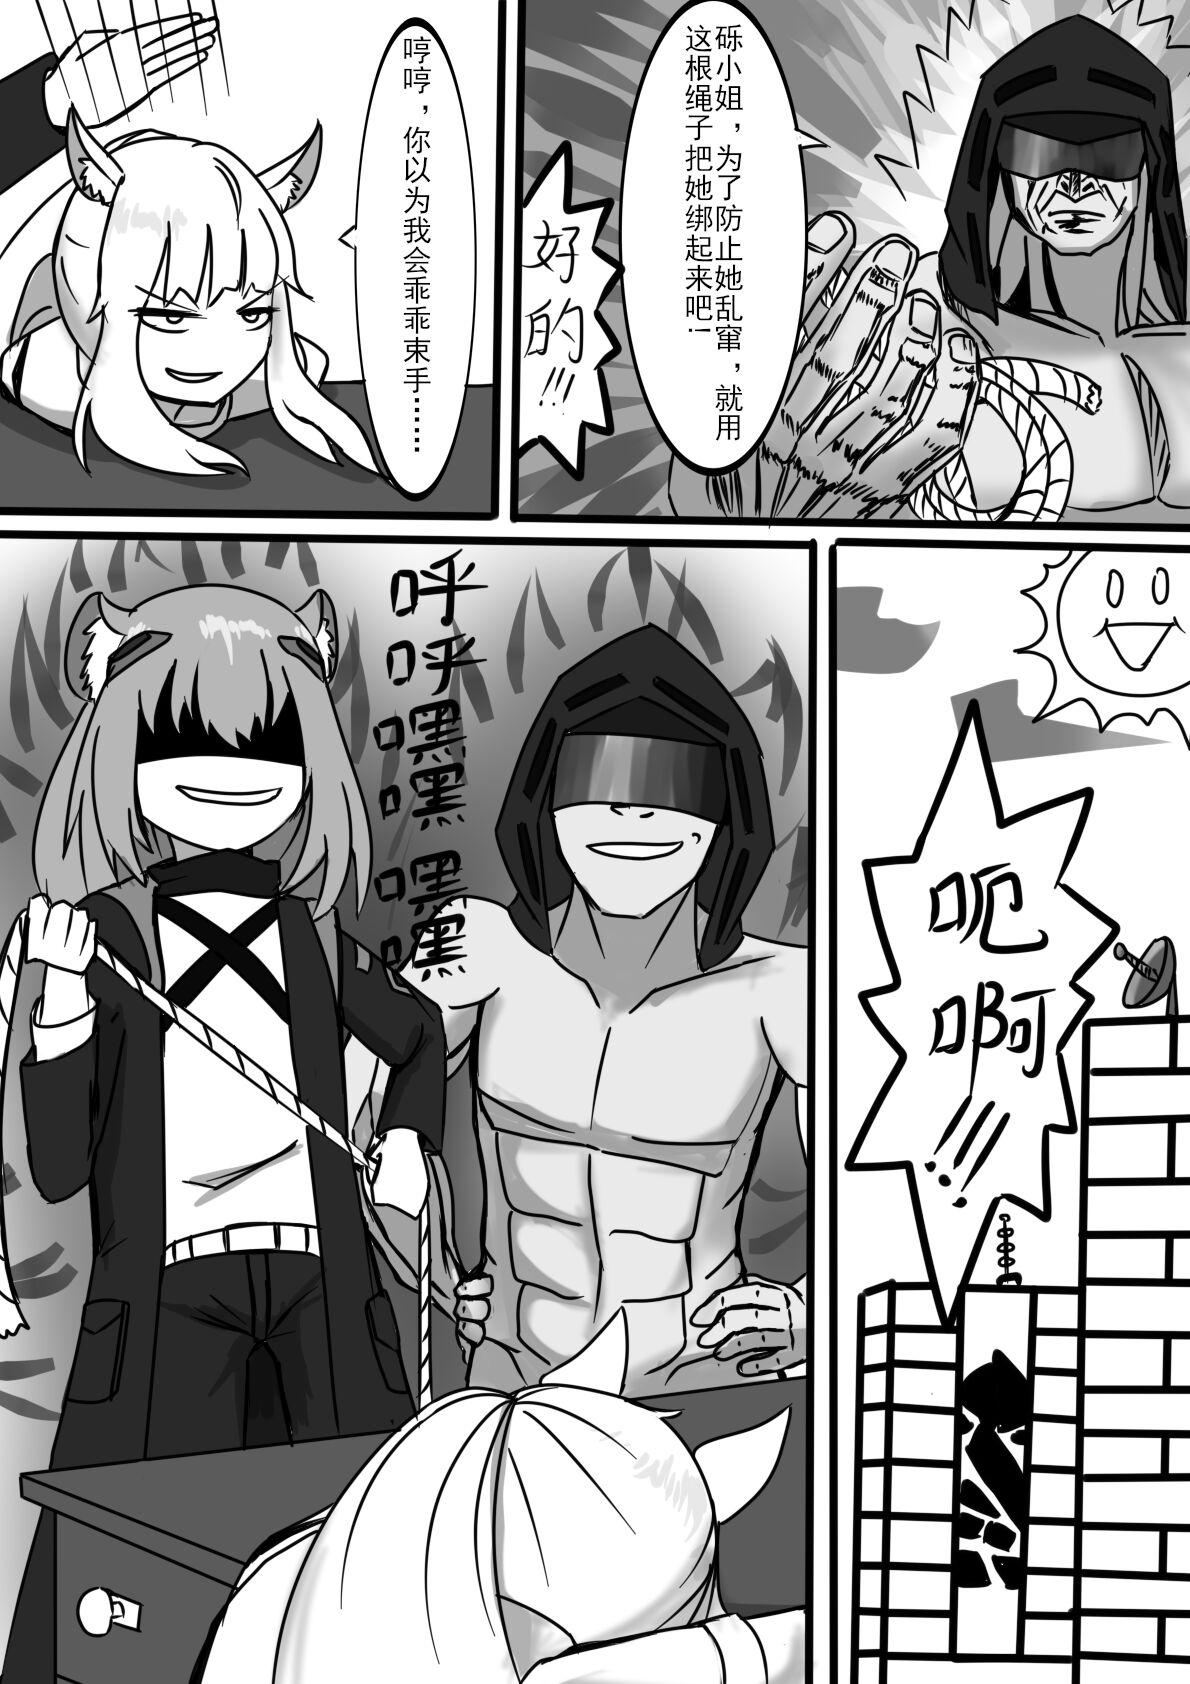 Brazil 白马？ - Arknights Transsexual - Page 10